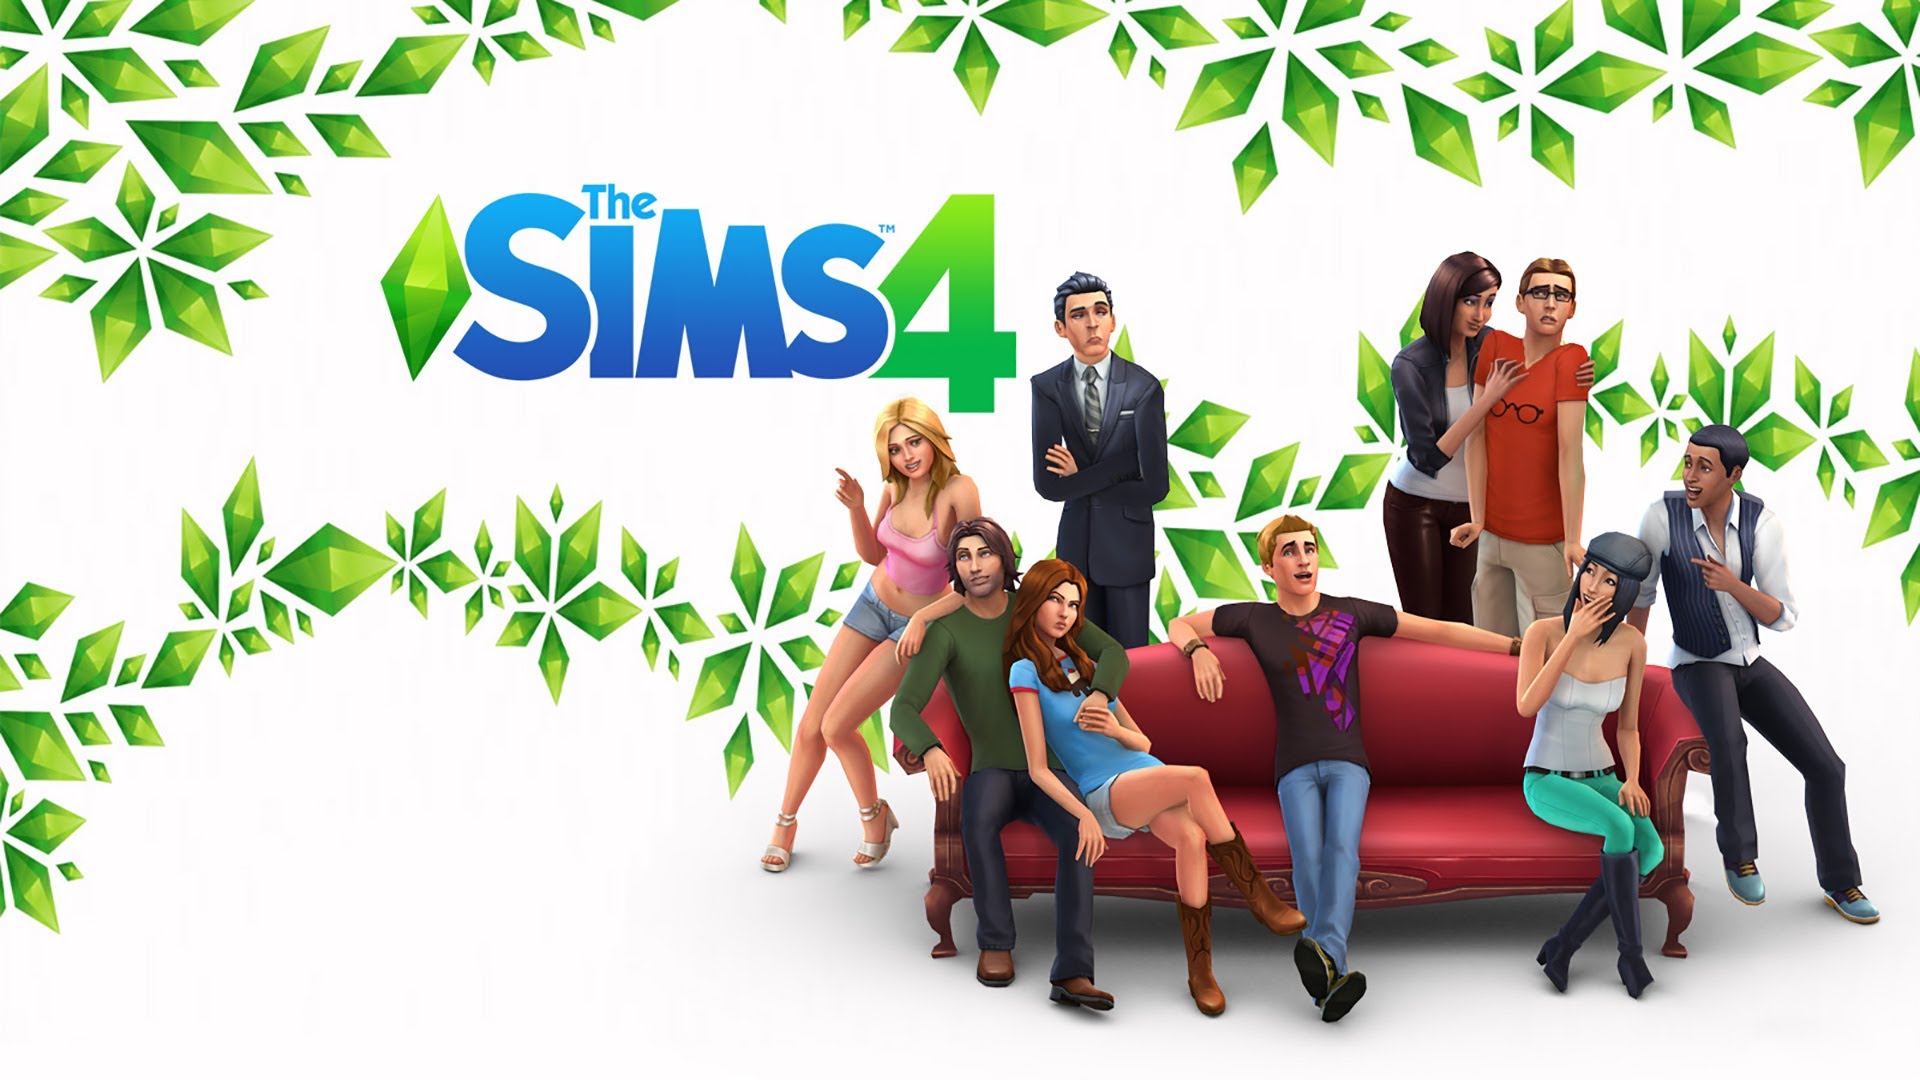 The sims 4 steam price фото 41